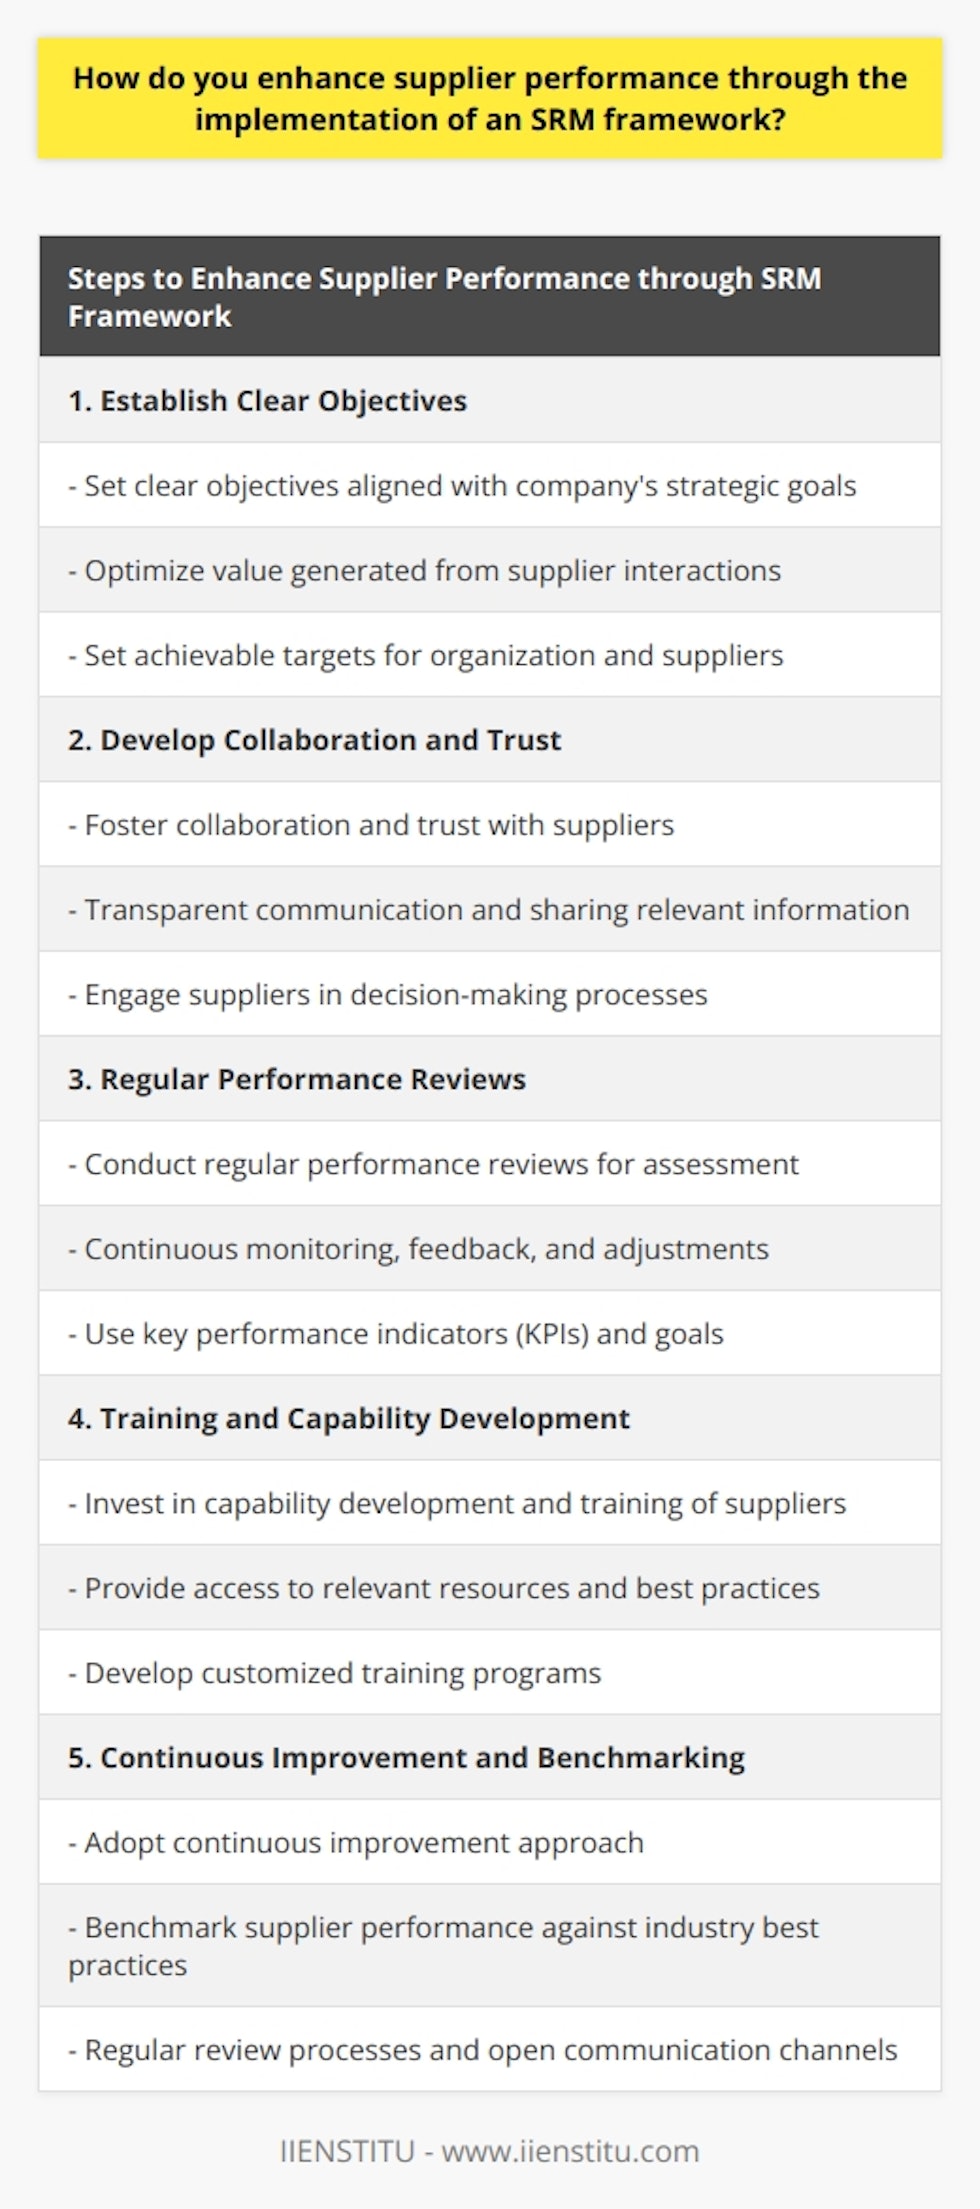 Enhancing supplier performance is crucial for organizations looking to optimize value from supplier interactions. Implementing a Supplier Relationship Management (SRM) framework can help achieve this goal. This framework involves strategic approaches, processes, and tools that foster productive relationships with key suppliers. The following steps outline how to enhance supplier performance through the implementation of an SRM framework.Establish Clear Objectives: It is essential to establish clear objectives that align with the company's overall strategic goals. These objectives should aim to optimize value generated from supplier interactions. Setting achievable targets for both the organization and its suppliers is critical in this step.Develop Collaboration and Trust: Fostering collaboration and trust is key to enhancing supplier performance. Transparent communication, sharing relevant information, and engaging suppliers in decision-making processes are effective ways to achieve this. Collaboration helps in understanding supplier capabilities, identifying opportunities for joint innovation, and reducing costs.Regular Performance Reviews: Conducting regular performance reviews is crucial to assessing and enhancing supplier performance. An effective SRM framework should allow for continuous monitoring, feedback, and adjustments based on key performance indicators (KPIs) and predefined goals. Performance reviews help identify gaps and opportunities for improvement over time.Training and Capability Development: Investing in capability development and training of suppliers is essential. Providing access to relevant resources, best practices, and training can enhance supplier competencies, ultimately leading to better products and services. Customized training programs focusing on specific skill sets and areas of improvement can be developed.Continuous Improvement and Benchmarking: Adopting a continuous improvement approach and benchmarking supplier performance against industry best practices is important. This allows organizations to identify and promote suppliers that demonstrate exceptional performance. Regular review processes and open communication channels facilitate continuous improvement and ensure suppliers remain competitive in the market.In conclusion, implementing an SRM framework is crucial for enhancing supplier performance. Defining clear objectives, fostering collaboration, conducting regular performance reviews, investing in training, and promoting continuous improvement are key steps in achieving this goal. These efforts not only help organizations achieve their strategic goals but also enable both parties to create shared value and long-lasting success.